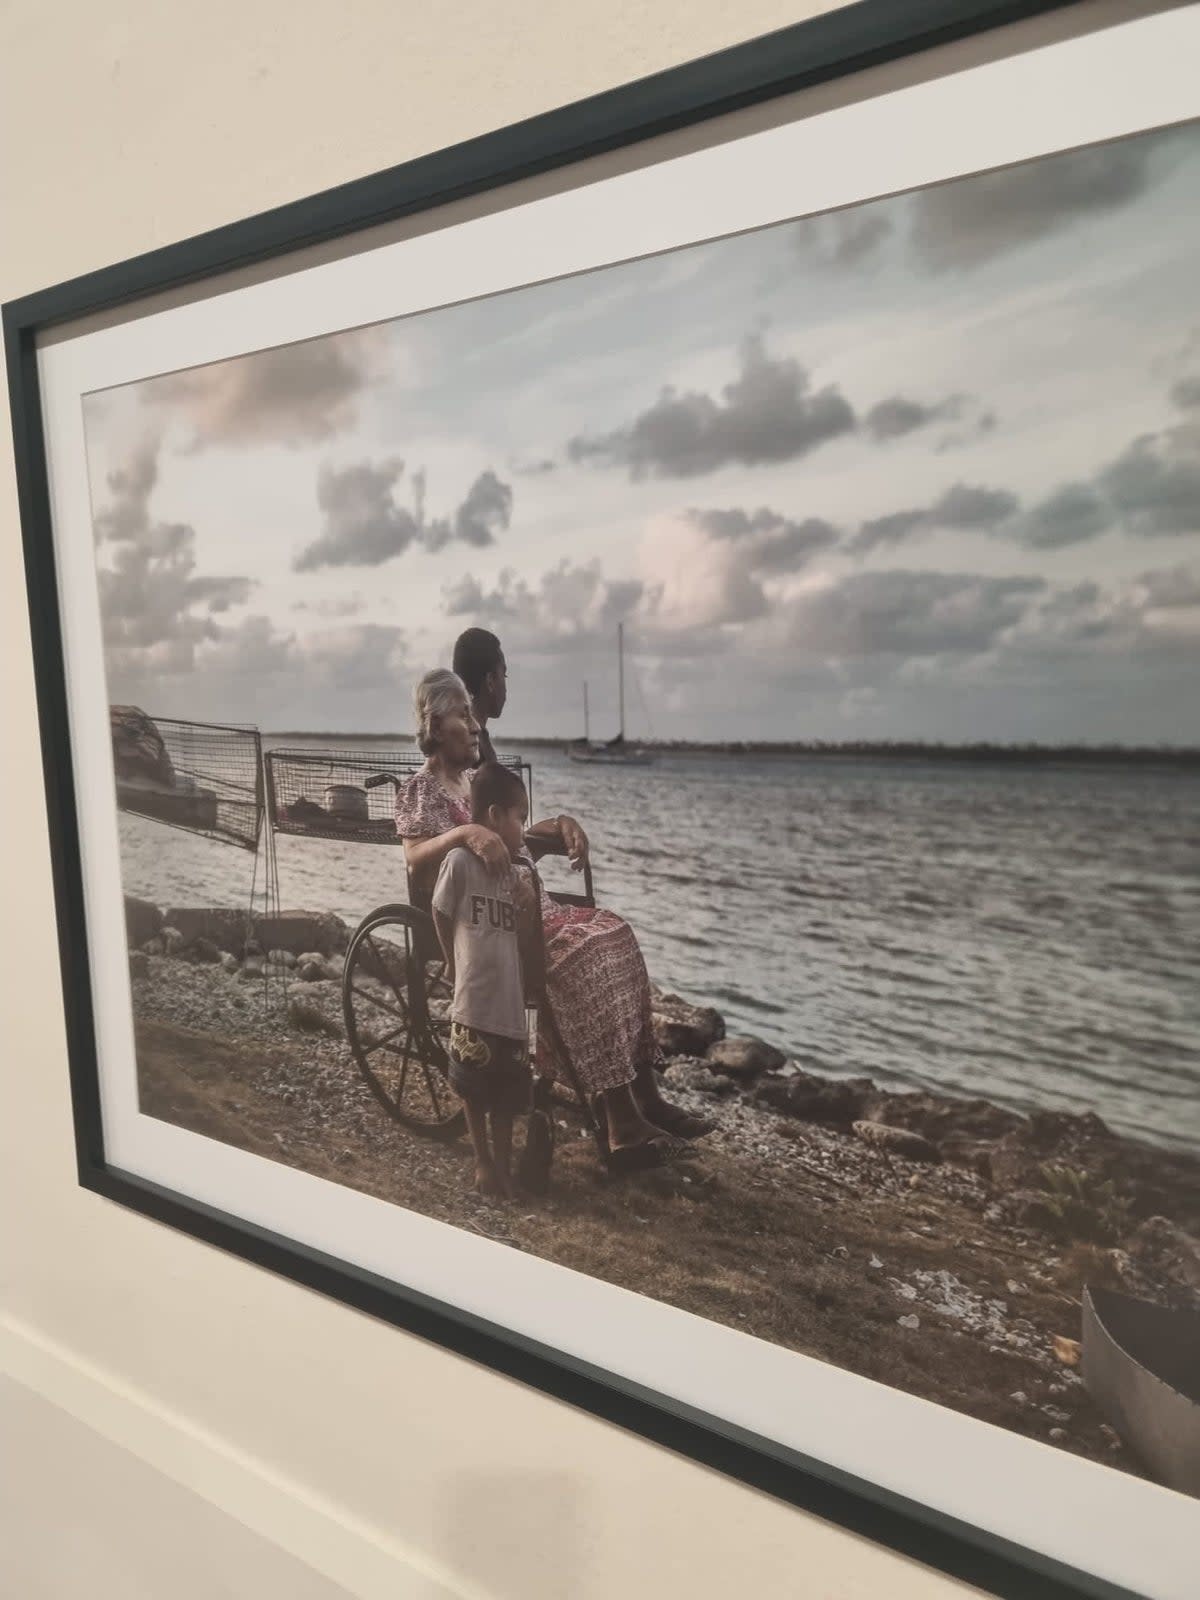 The photo of Theresa de Brun, Tina Stege’s great aunt, and her grandchildren on display inside the Cop28 venue. The image bears witness to the scale of the erosion caused by sea level rise on the remote outer island of Likiep in the Marshall Islands (Tina Stege)